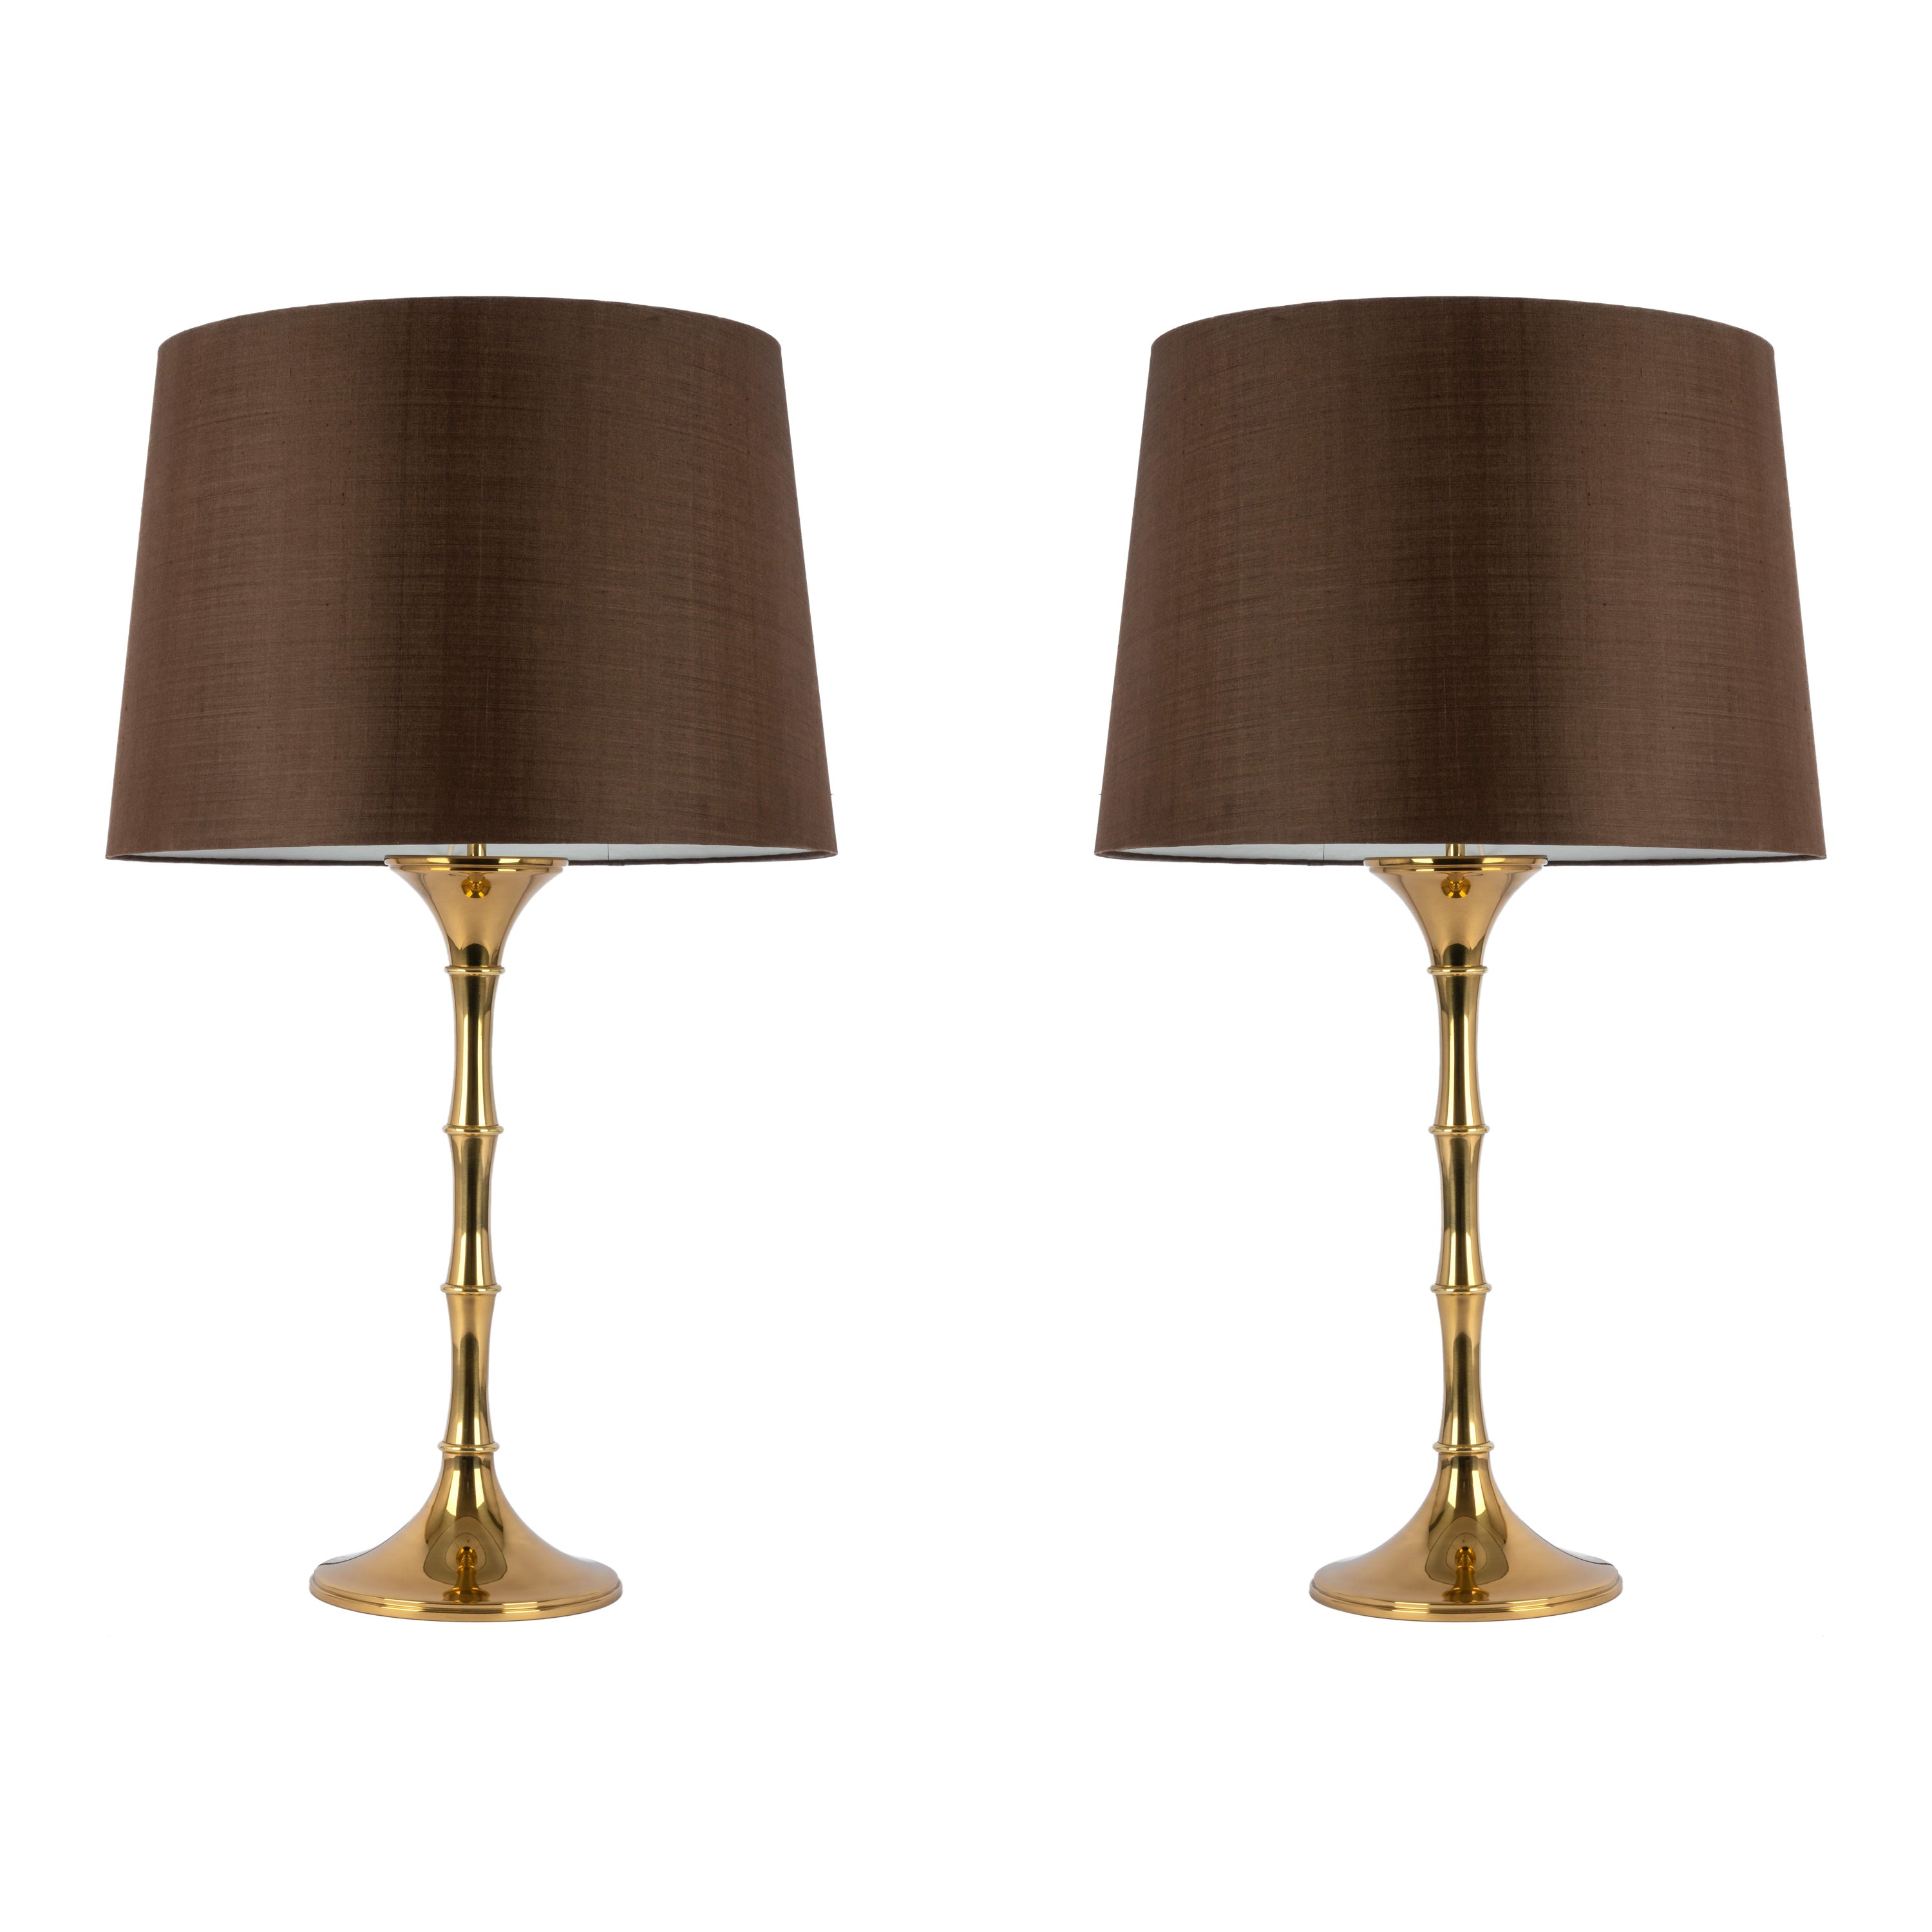 Pair of Bamboo Table Lamps by Ingo Maurer, Germany, 1970s